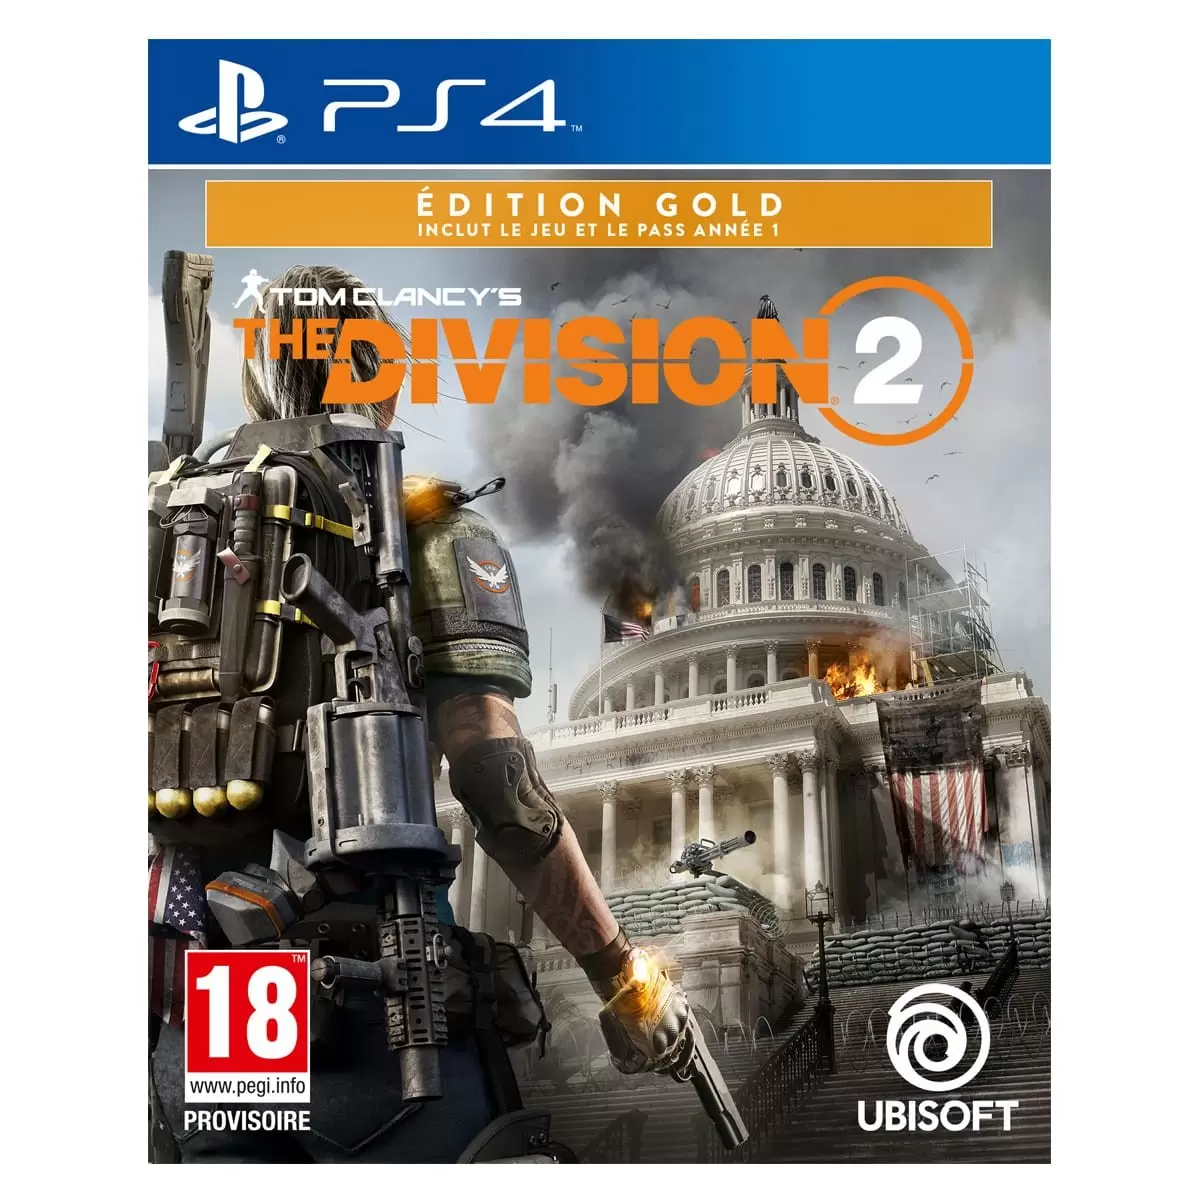 PS4 Games - The Division 2 Edition Gold